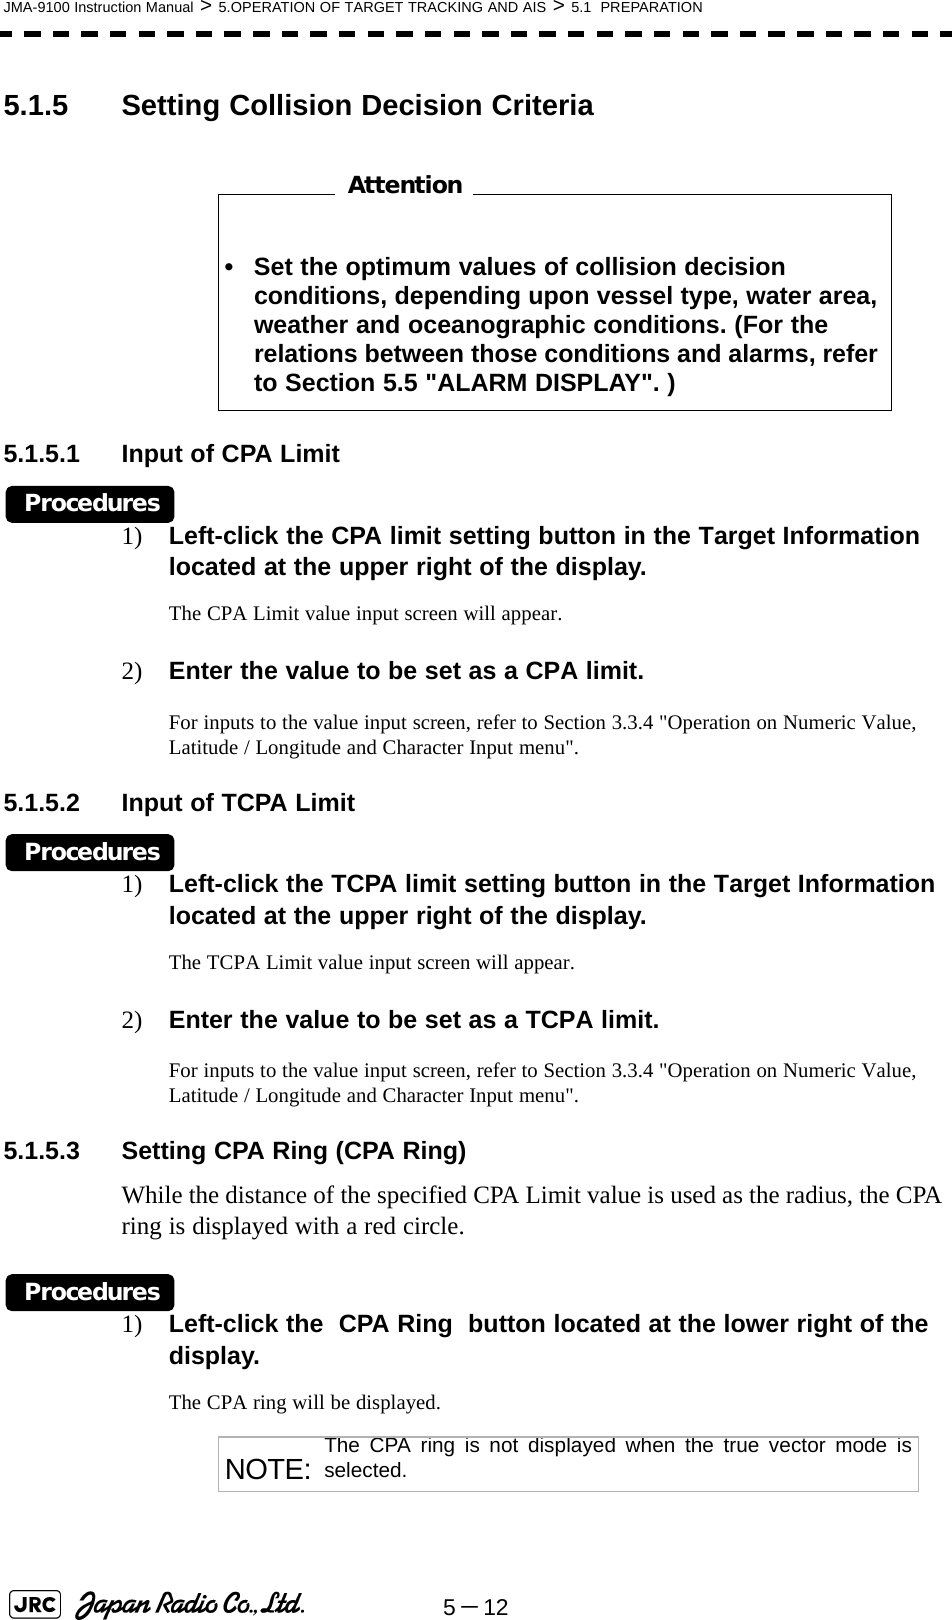 5－12JMA-9100 Instruction Manual &gt; 5.OPERATION OF TARGET TRACKING AND AIS &gt; 5.1  PREPARATION5.1.5 Setting Collision Decision Criteria　　　　　　　　5.1.5.1 Input of CPA LimitProcedures1) Left-click the CPA limit setting button in the Target Information located at the upper right of the display.The CPA Limit value input screen will appear.2) Enter the value to be set as a CPA limit.For inputs to the value input screen, refer to Section 3.3.4 &quot;Operation on Numeric Value, Latitude / Longitude and Character Input menu&quot;.5.1.5.2 Input of TCPA LimitProcedures1) Left-click the TCPA limit setting button in the Target Information located at the upper right of the display.The TCPA Limit value input screen will appear.2) Enter the value to be set as a TCPA limit.For inputs to the value input screen, refer to Section 3.3.4 &quot;Operation on Numeric Value, Latitude / Longitude and Character Input menu&quot;.5.1.5.3 Setting CPA Ring (CPA Ring)While the distance of the specified CPA Limit value is used as the radius, the CPA ring is displayed with a red circle.Procedures1) Left-click the  CPA Ring  button located at the lower right of the display.The CPA ring will be displayed. • Set the optimum values of collision decision conditions, depending upon vessel type, water area, weather and oceanographic conditions. (For the relations between those conditions and alarms, refer to Section 5.5 &quot;ALARM DISPLAY&quot;. )NOTE: The CPA ring is not displayed when the true vector mode isselected.Attention